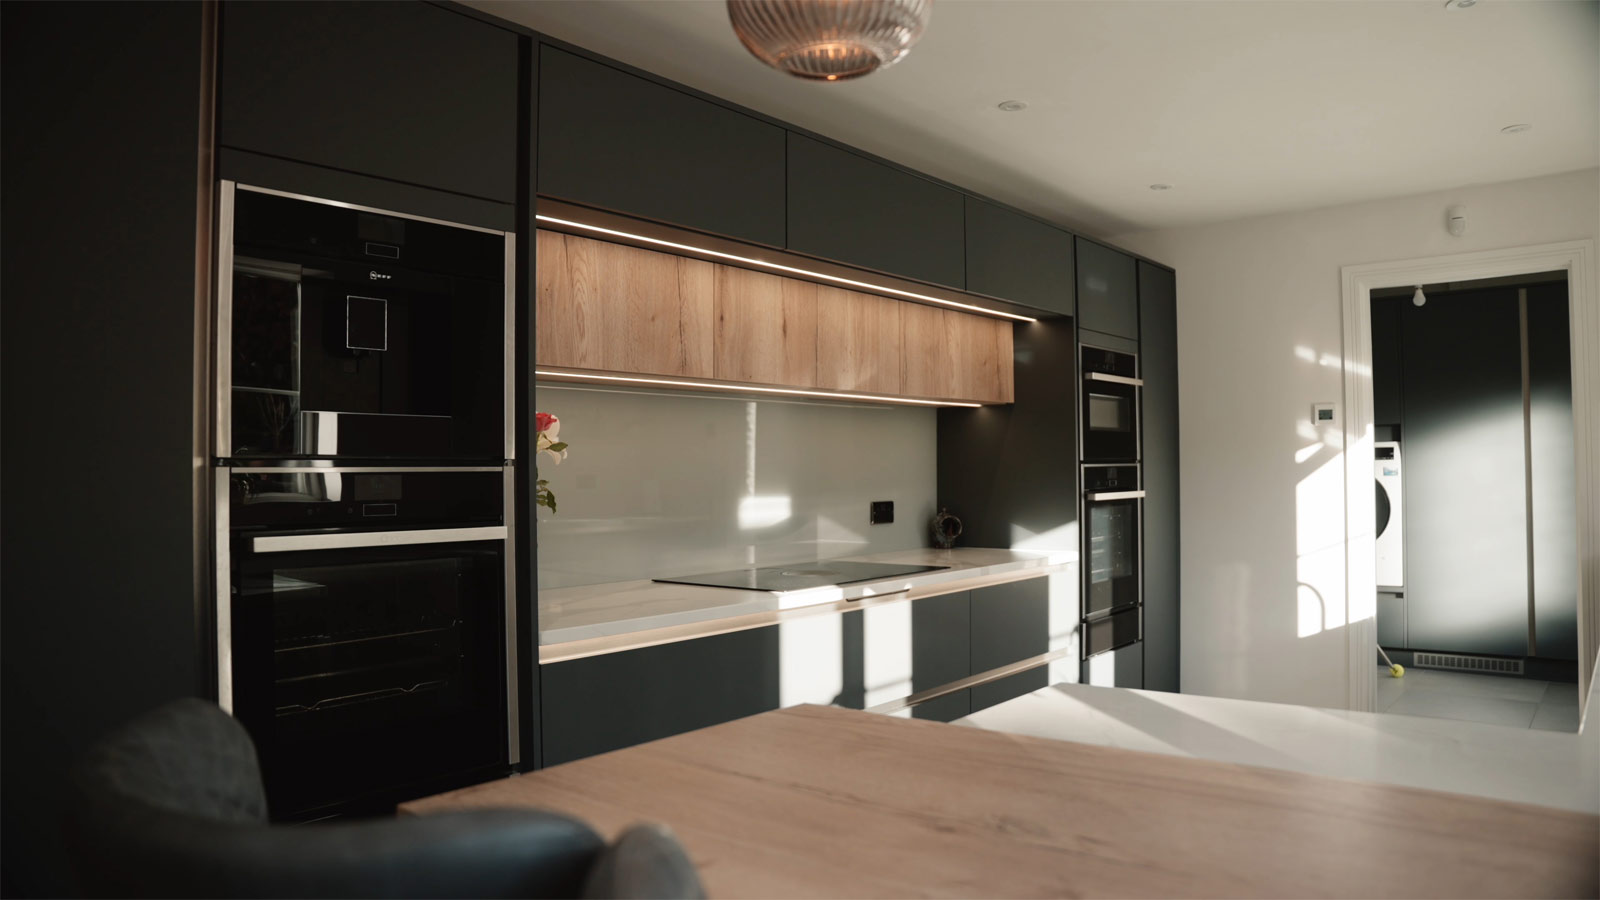 A handleless kitchen that costs less than the average cost of a kitchen extension